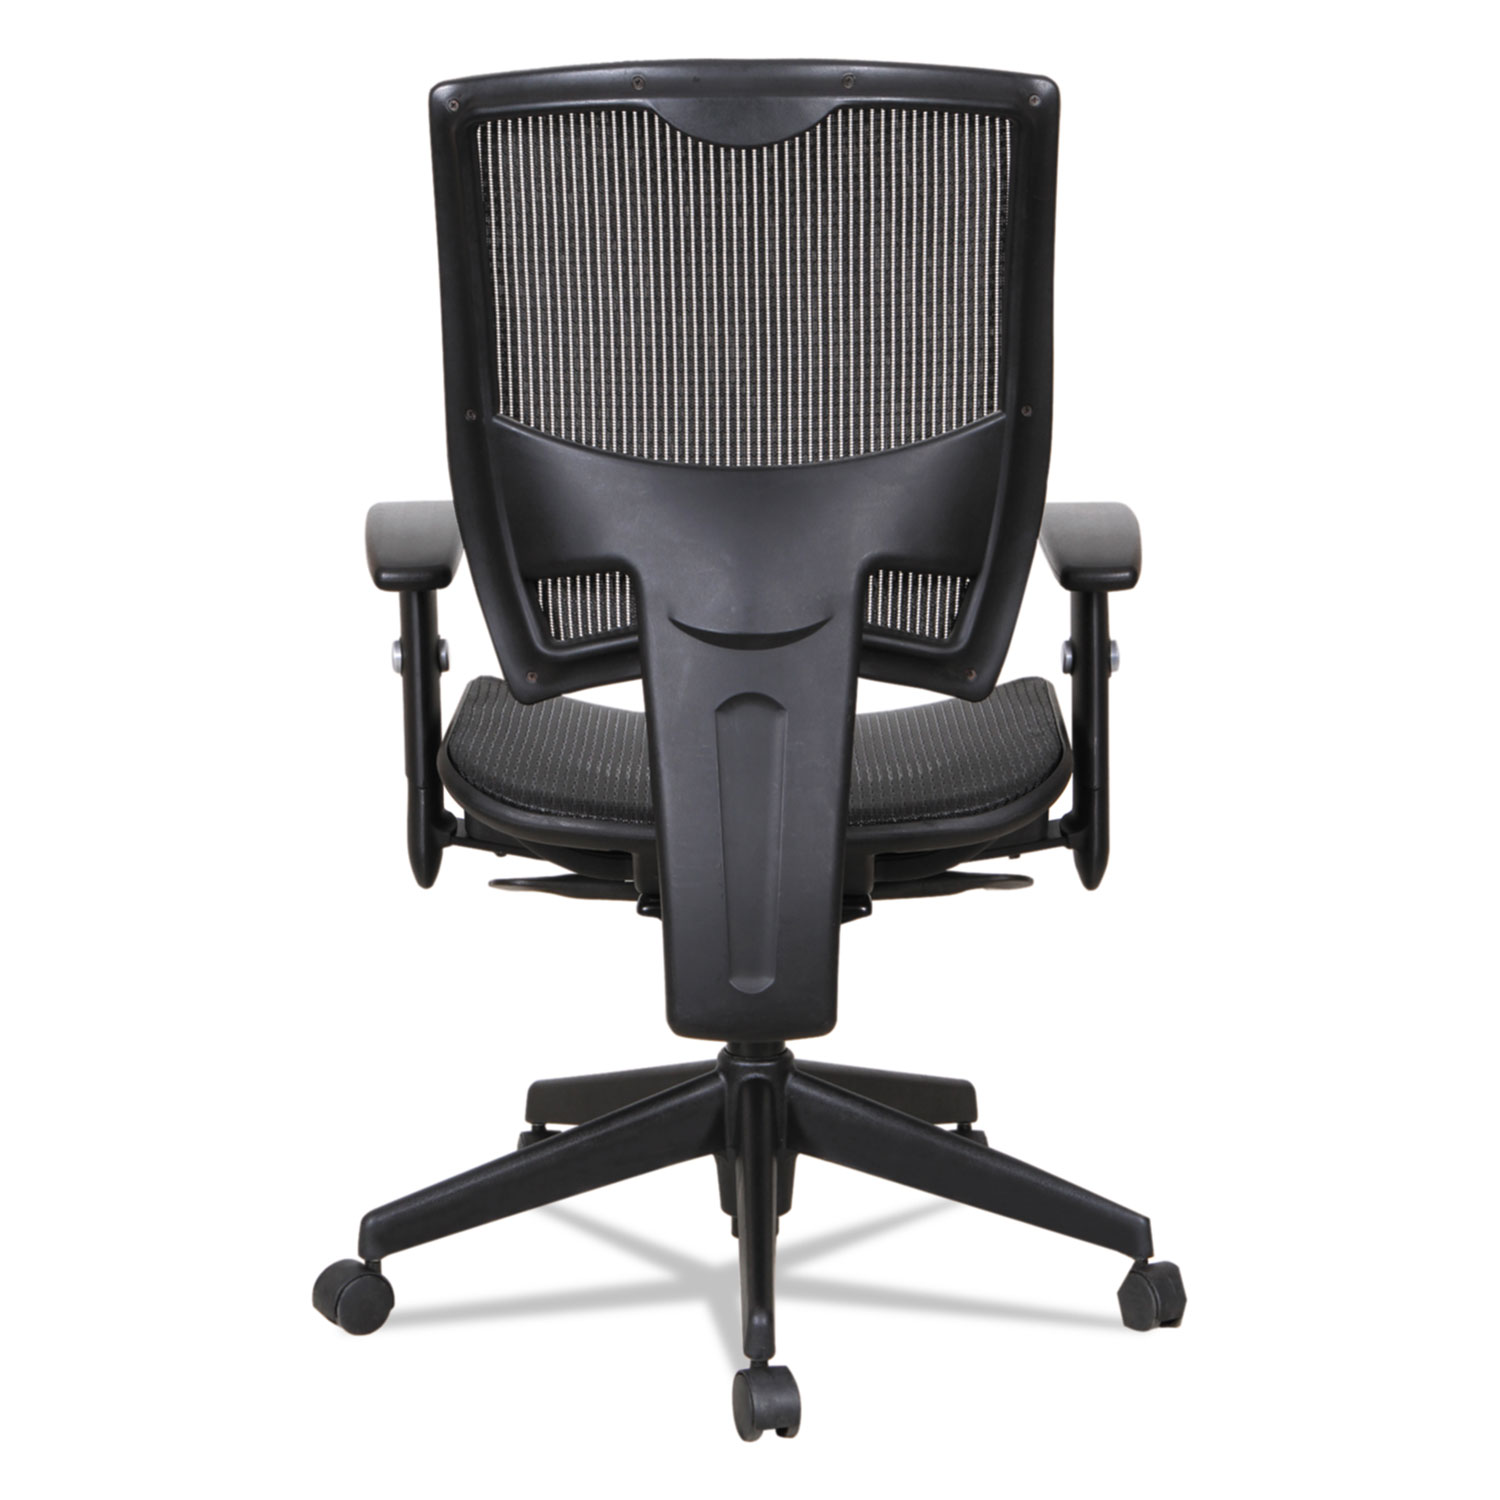 Alera Epoch Series Suspension Mesh Multifunction Chair, Supports up to 275 lbs., Black Seat/Black Back, Black Base